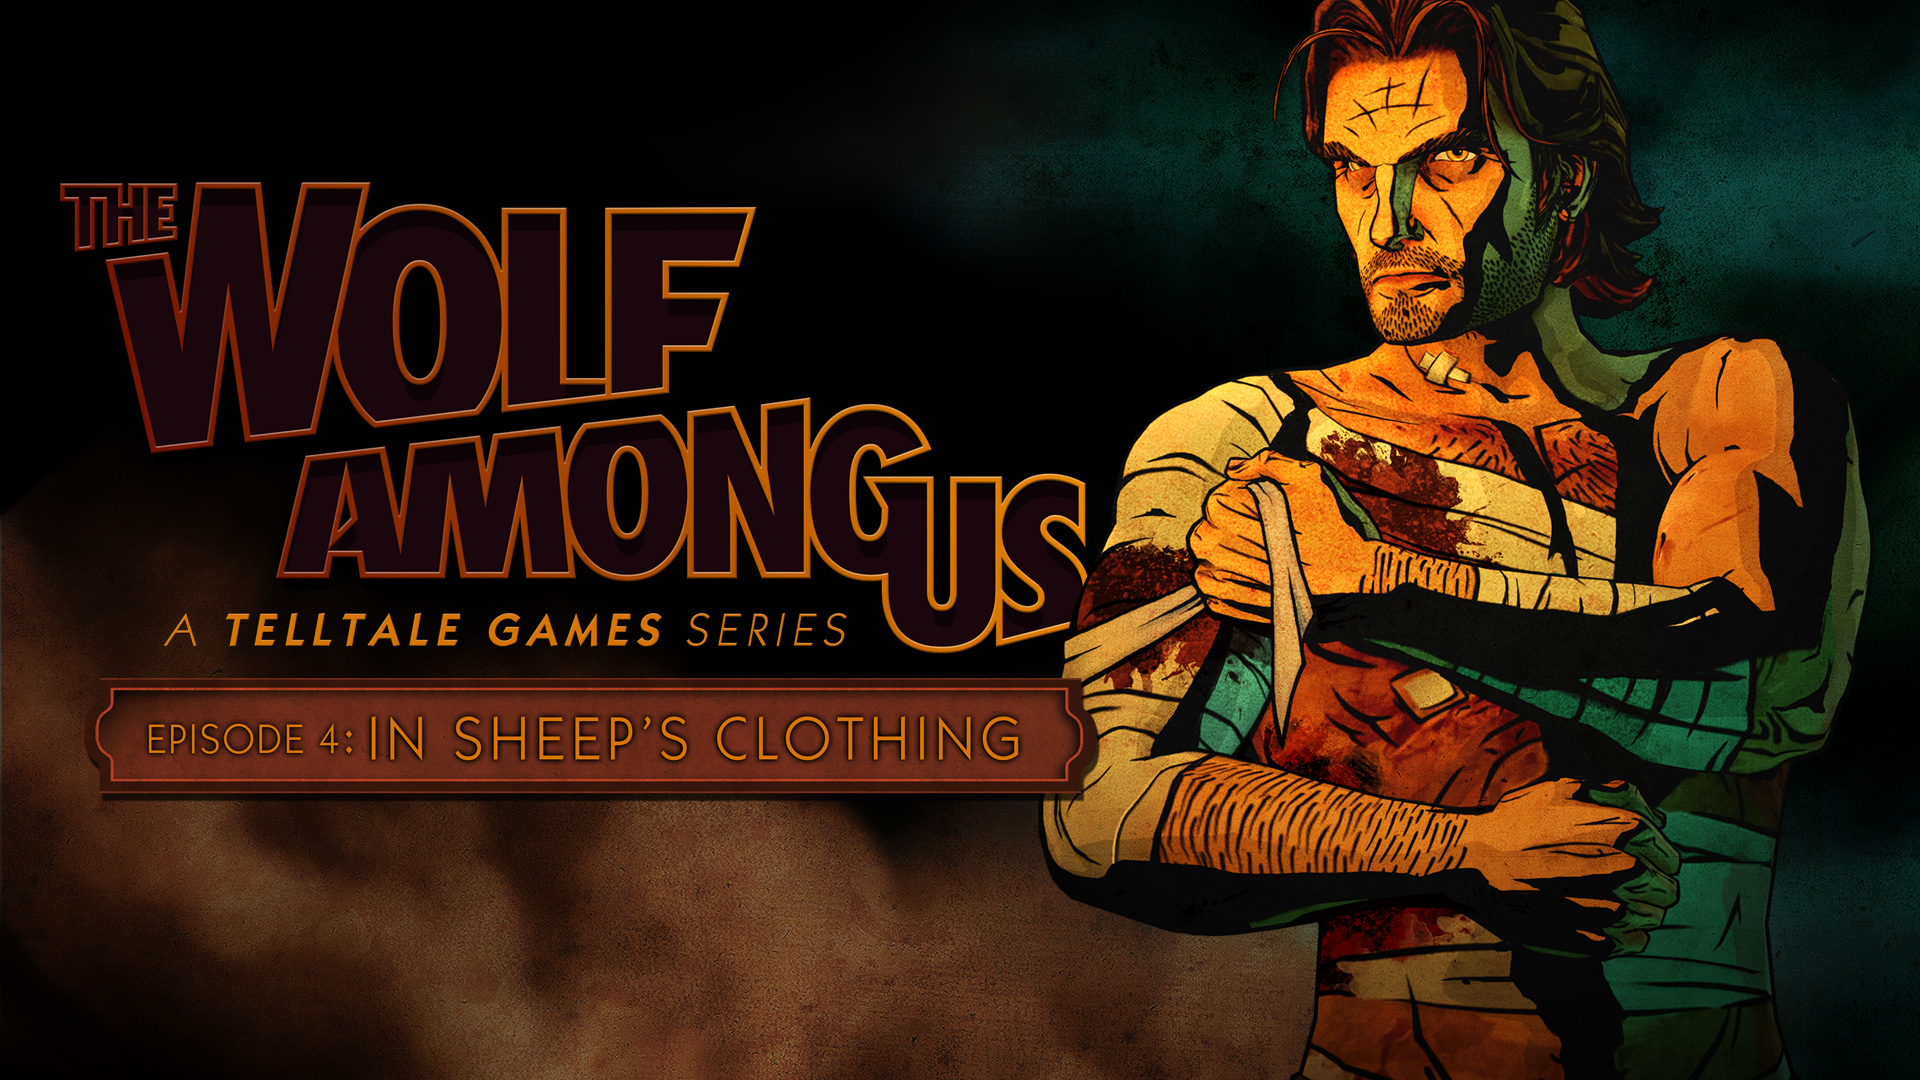 The Wolf Among Us: Episode 4 now available on Xbox 360